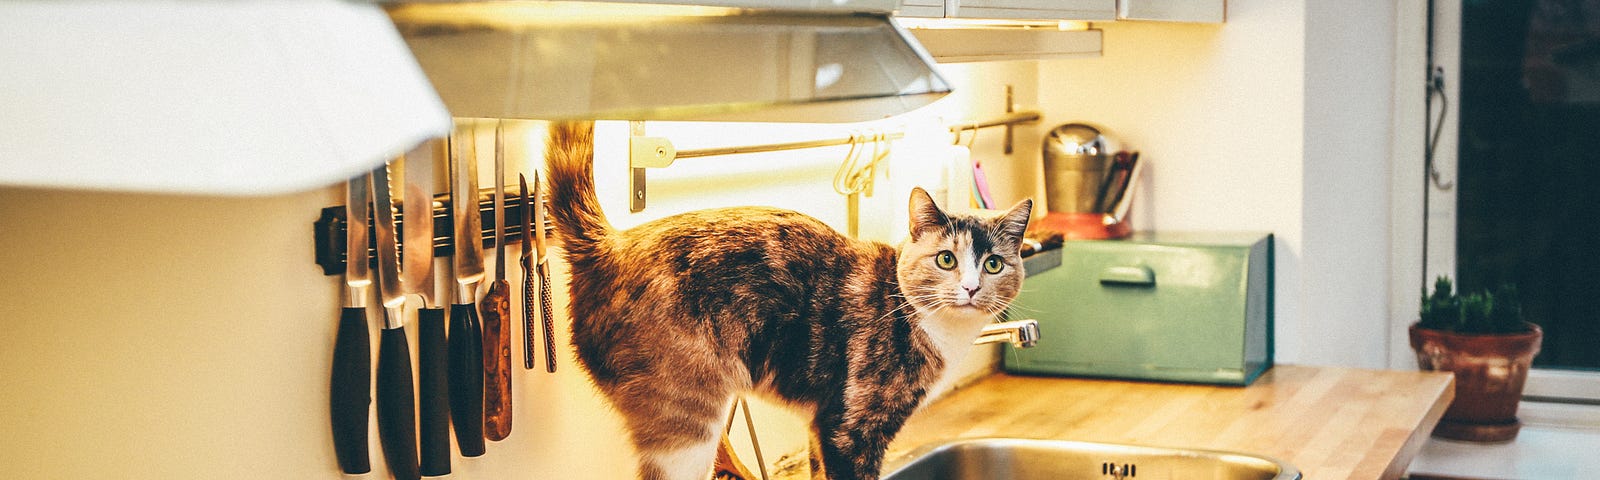 Tabby cat on top of the kitchen sink